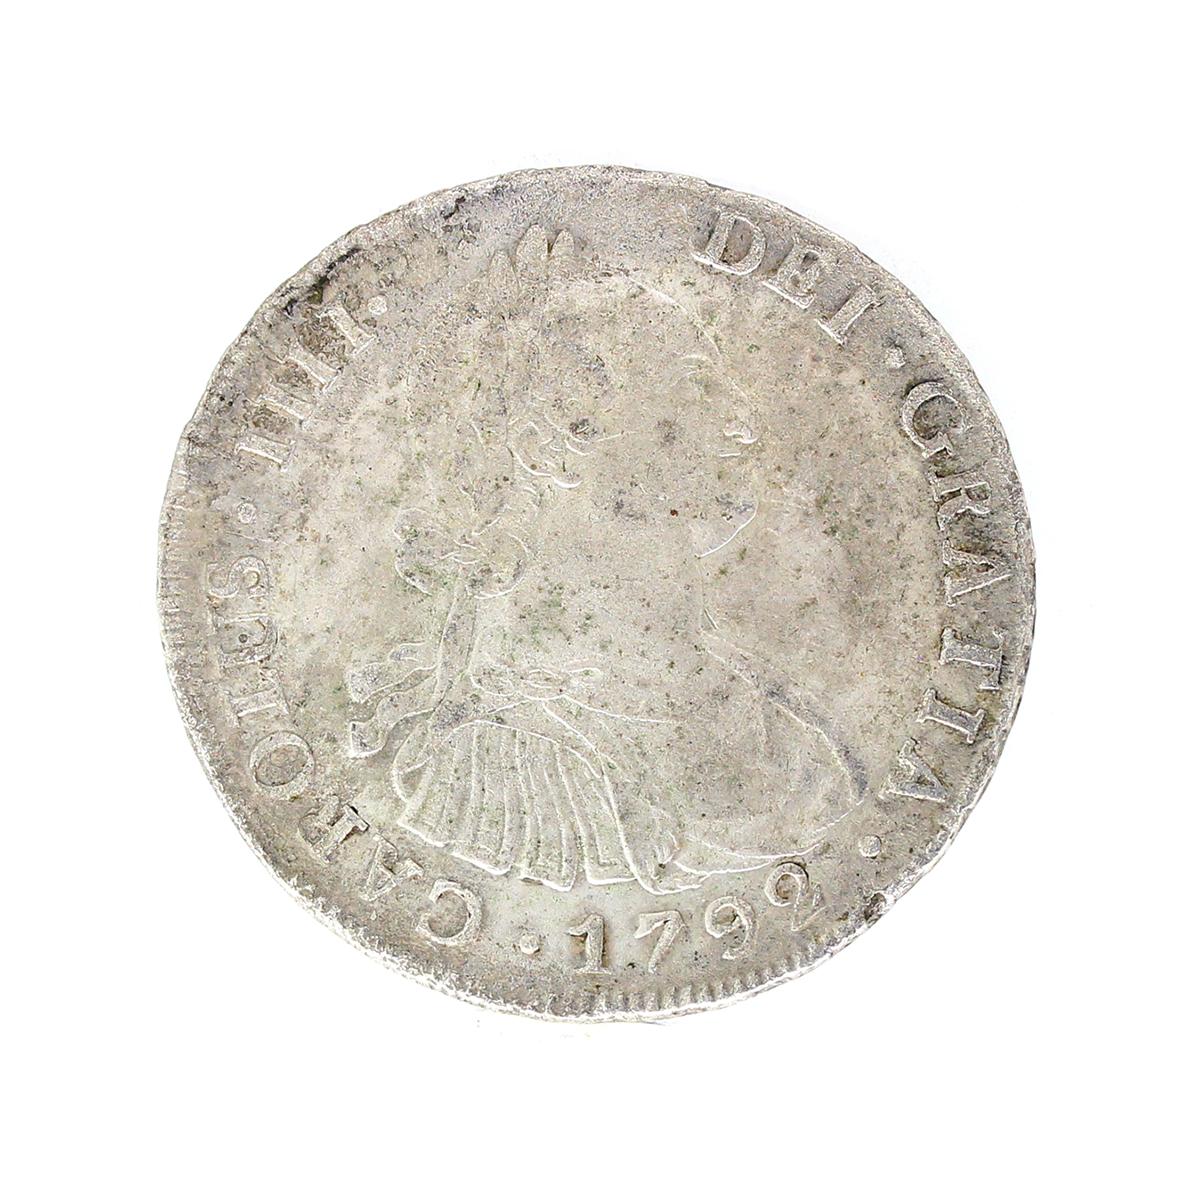 Extremely Rare 1792 Eight Reale American First Silver Dollar Coin Great Investment